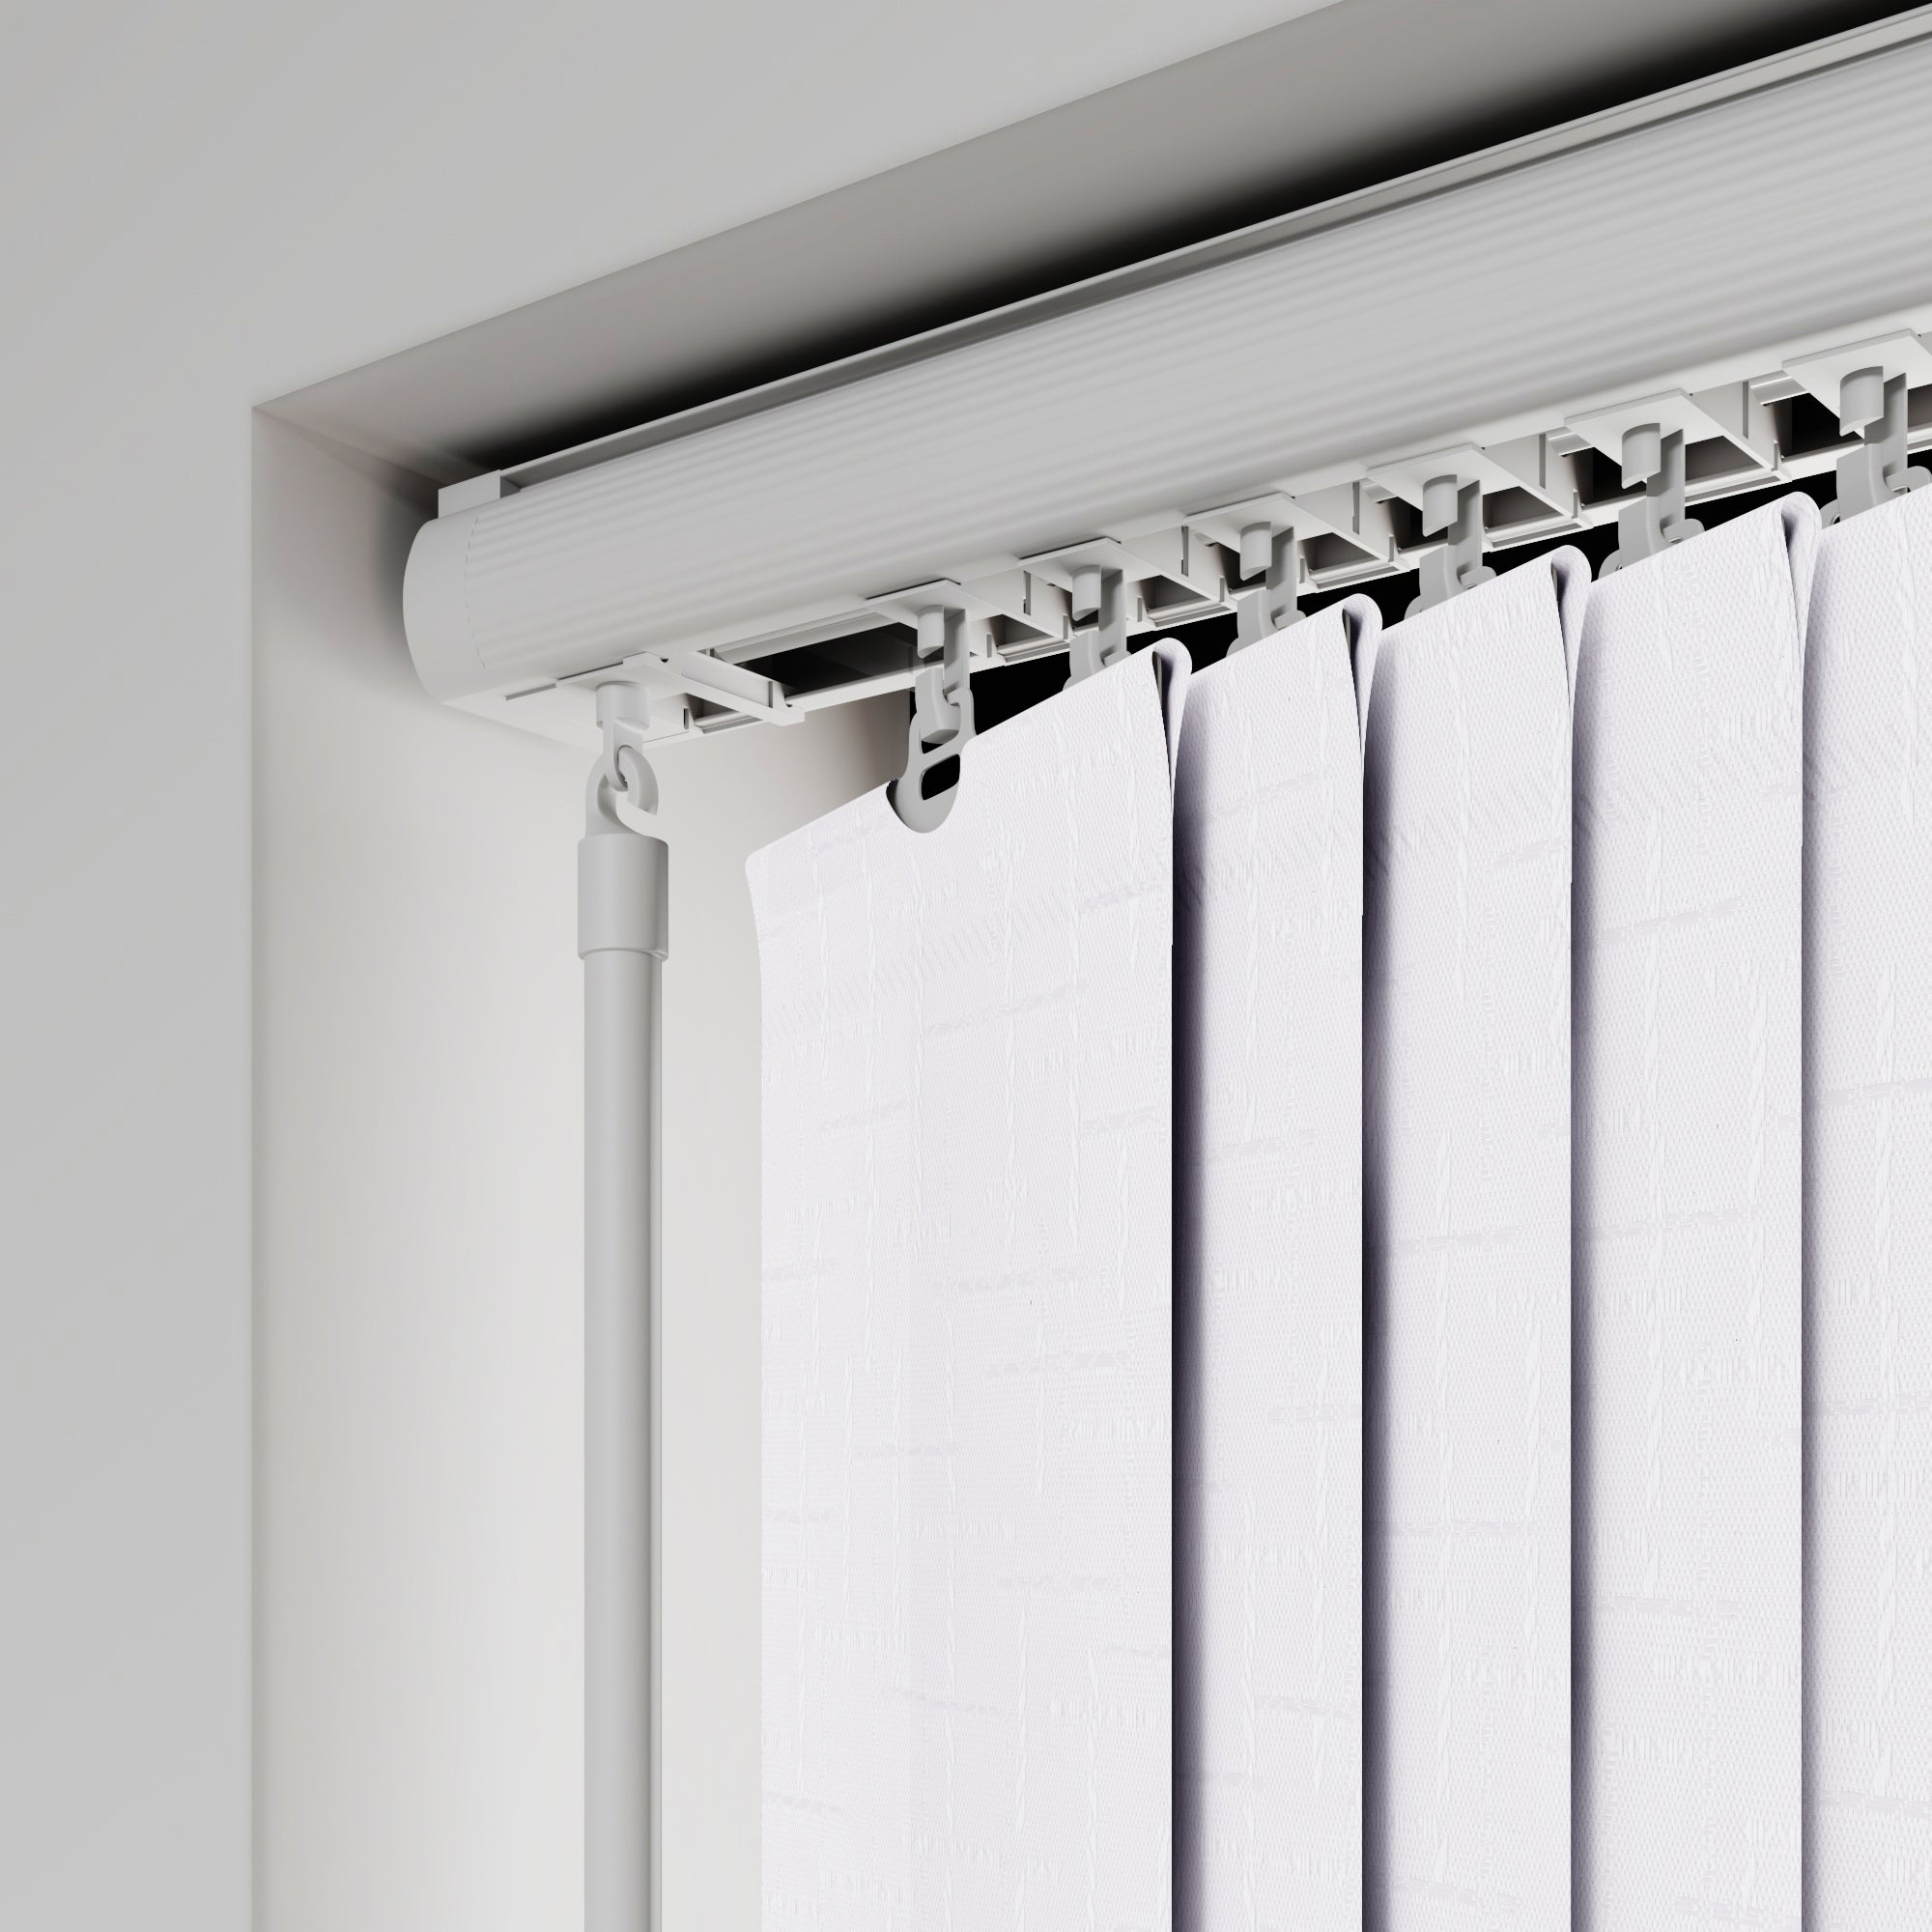 Malimo Made to Measure Vertical Blind Malimo Frost